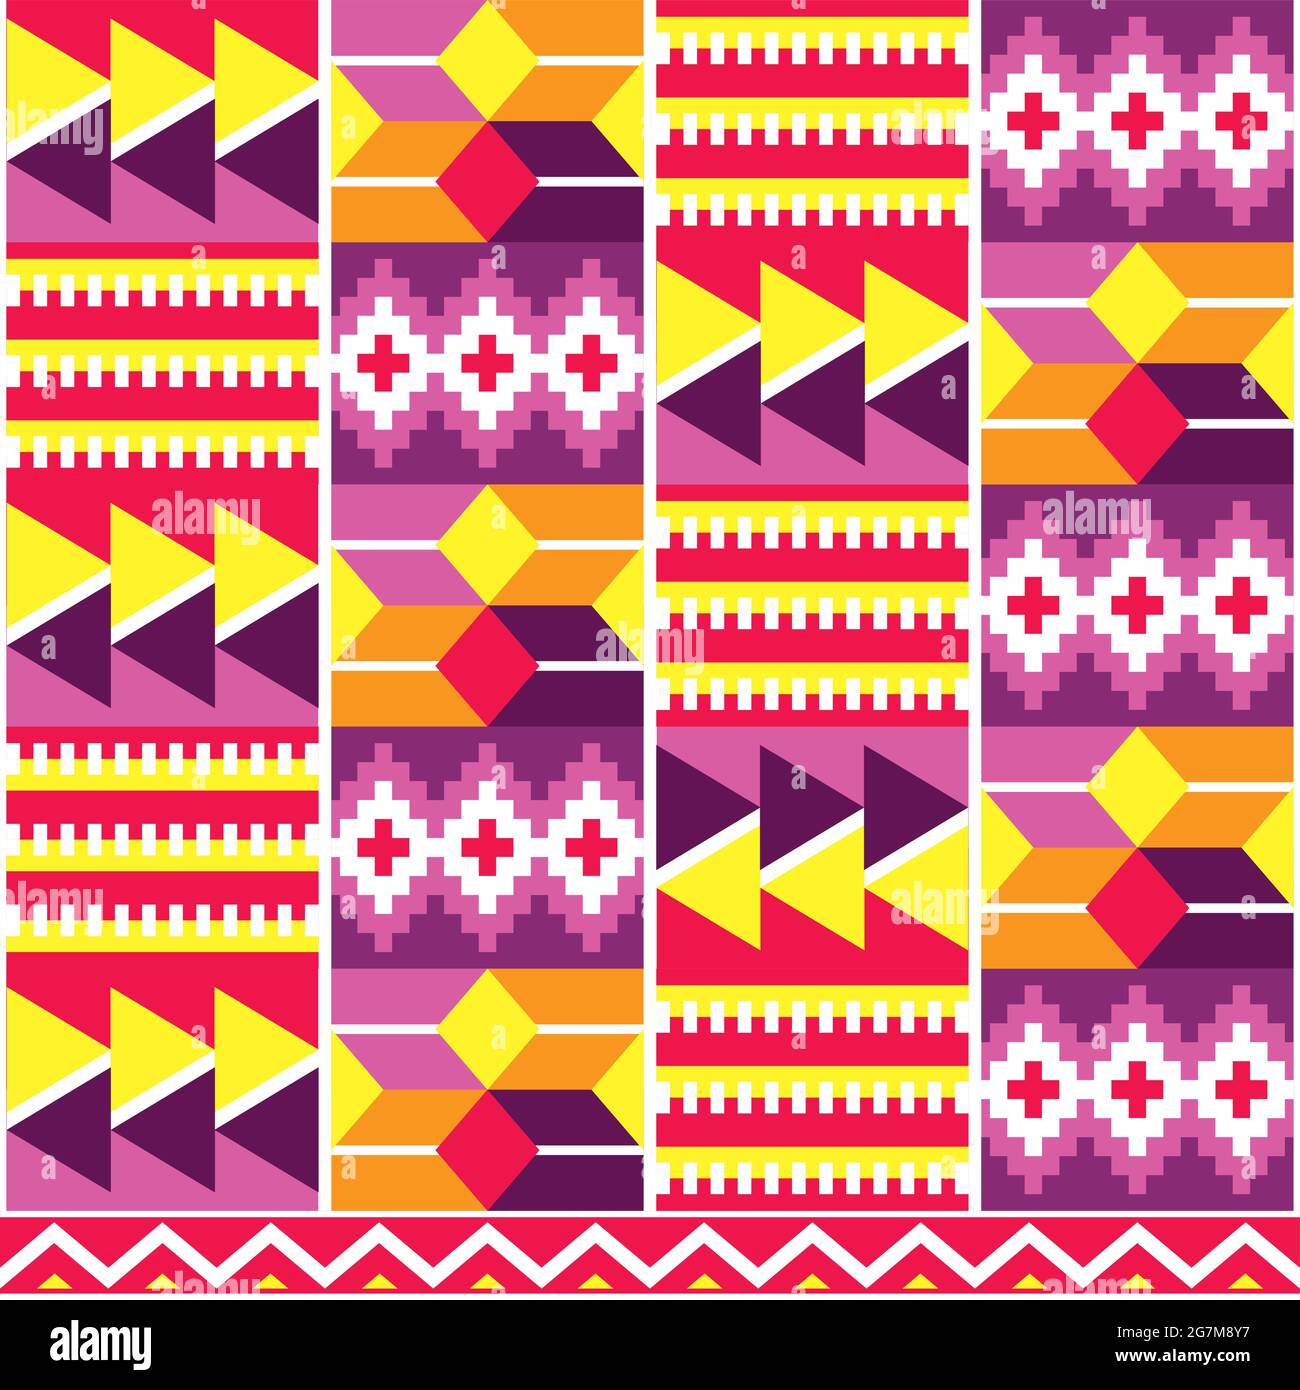 Tribal african cool geometric seamless vector pattern, inspired by Kente nwentoma style designs from Ghana Stock Vector